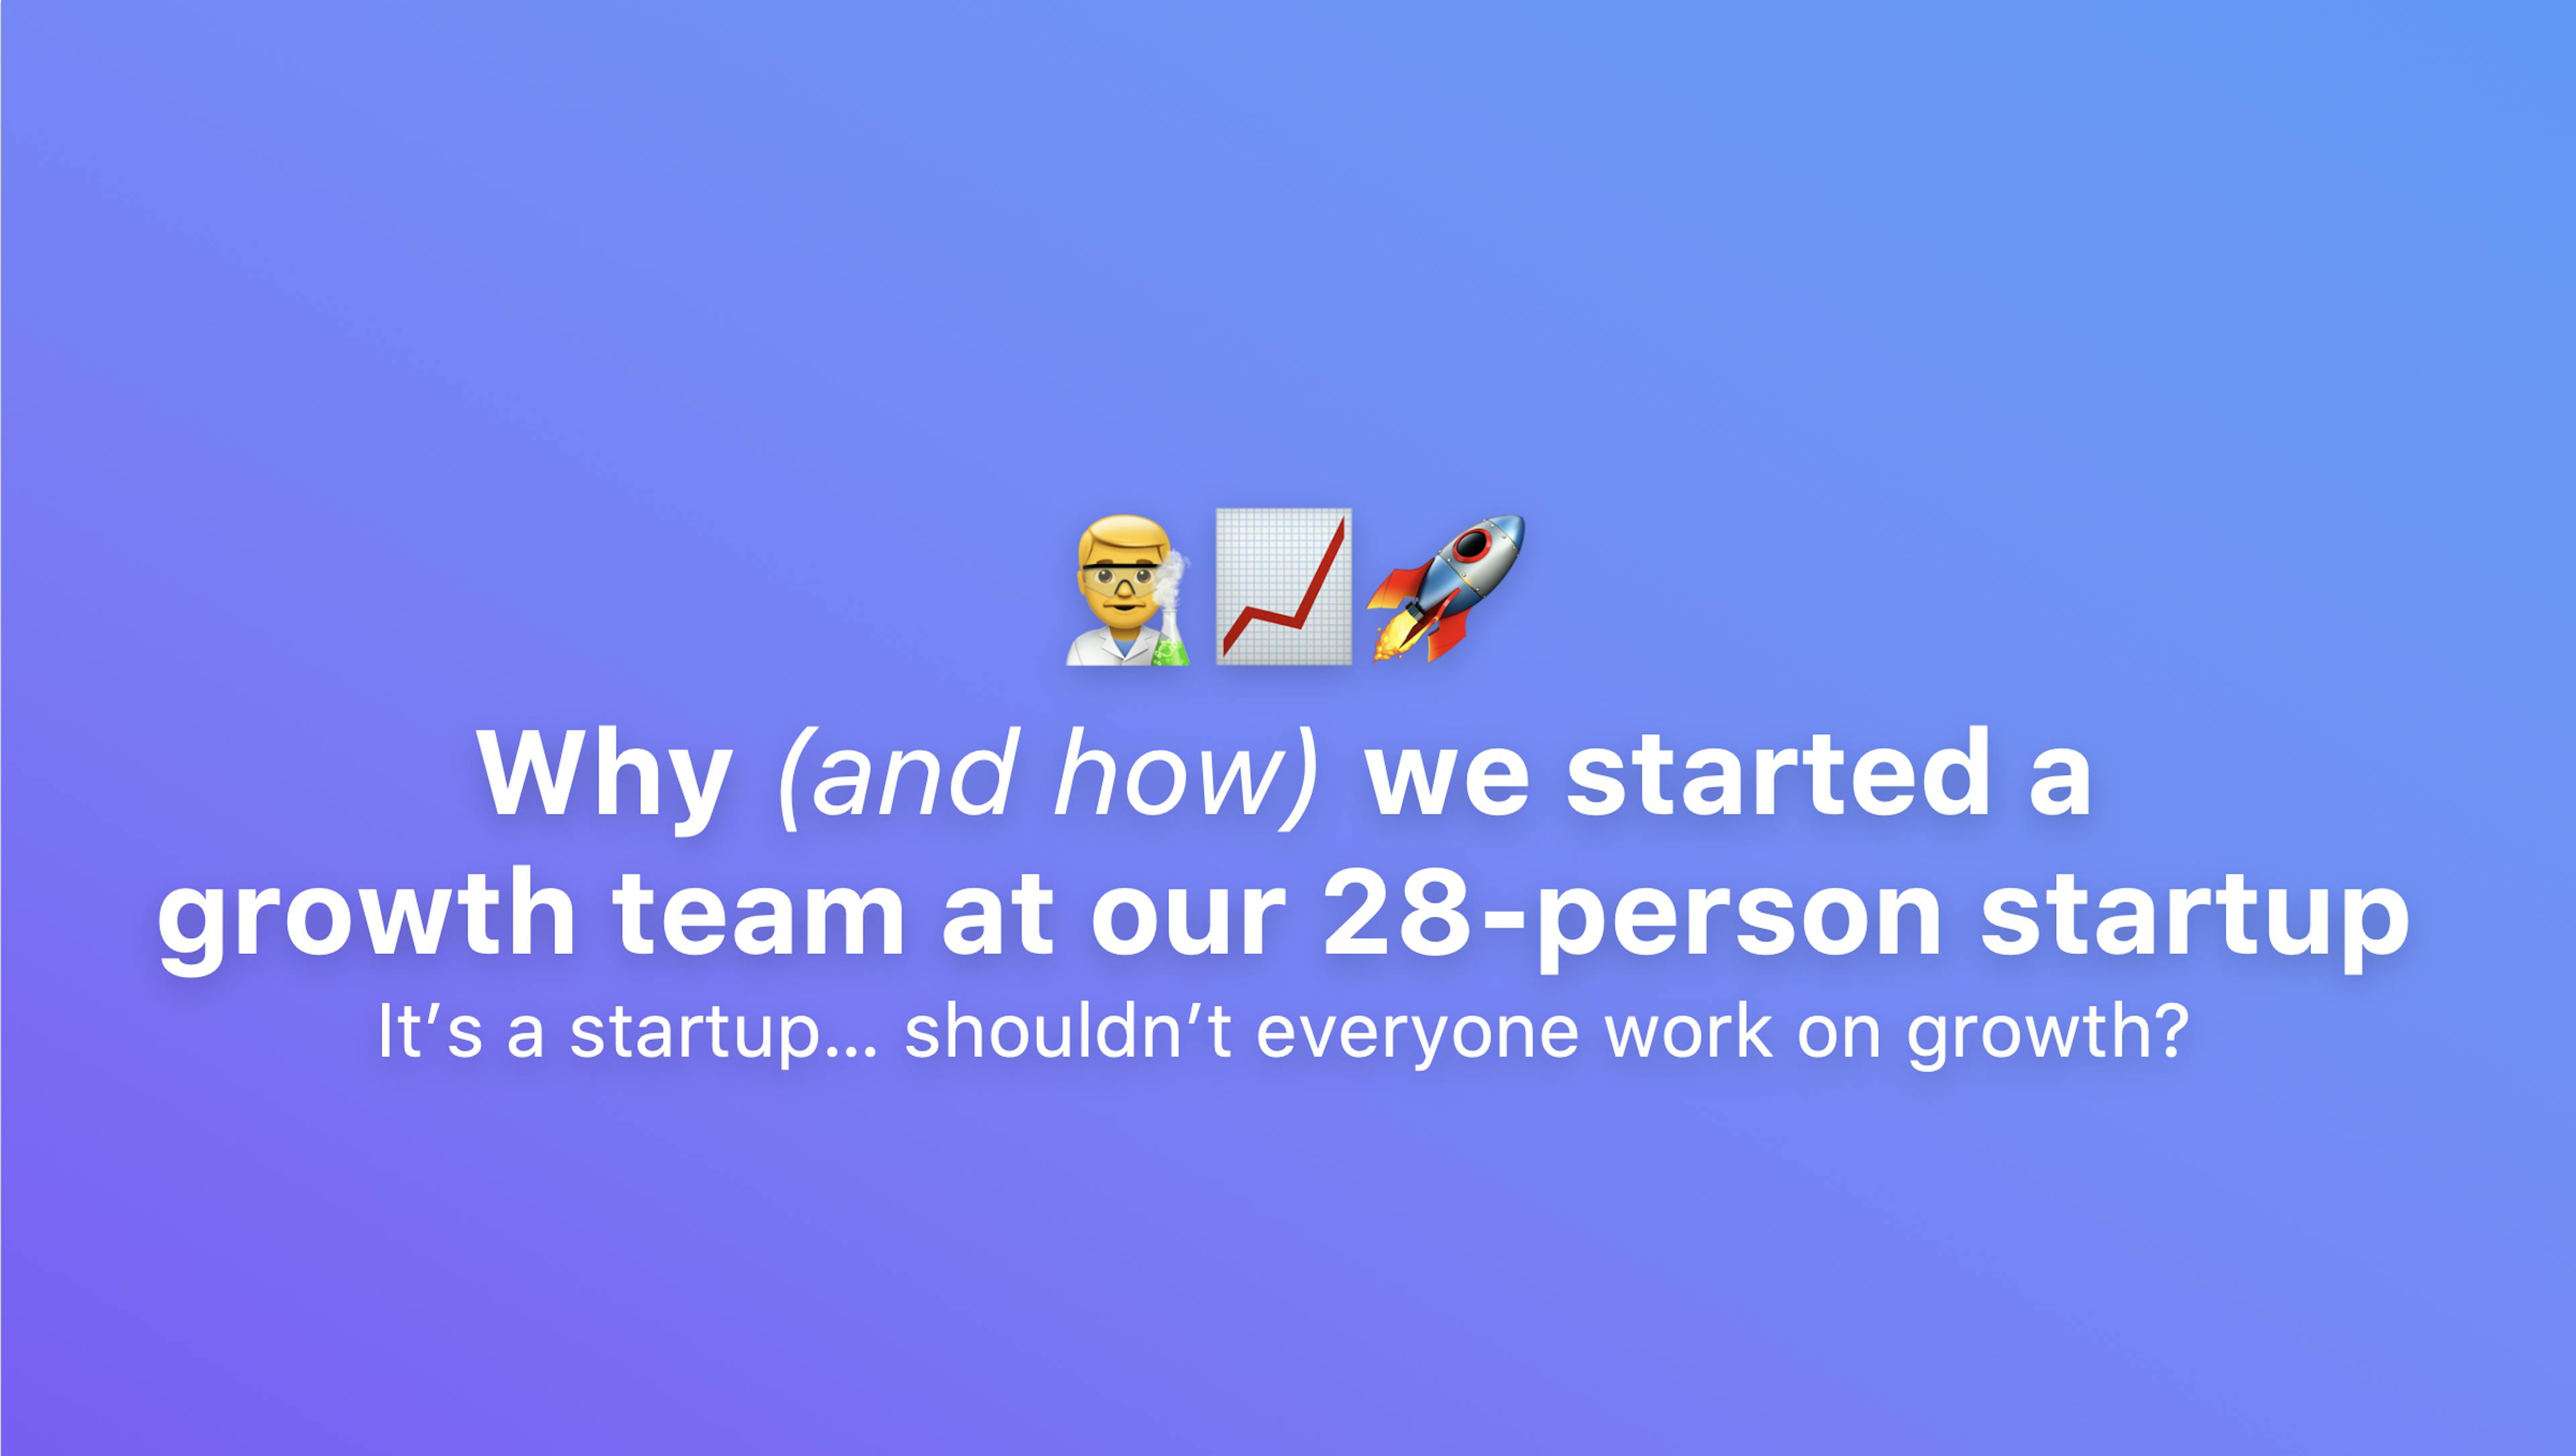 /why-and-how-we-started-a-growth-team-at-our-28-person-startup-849dcd8da554 feature image